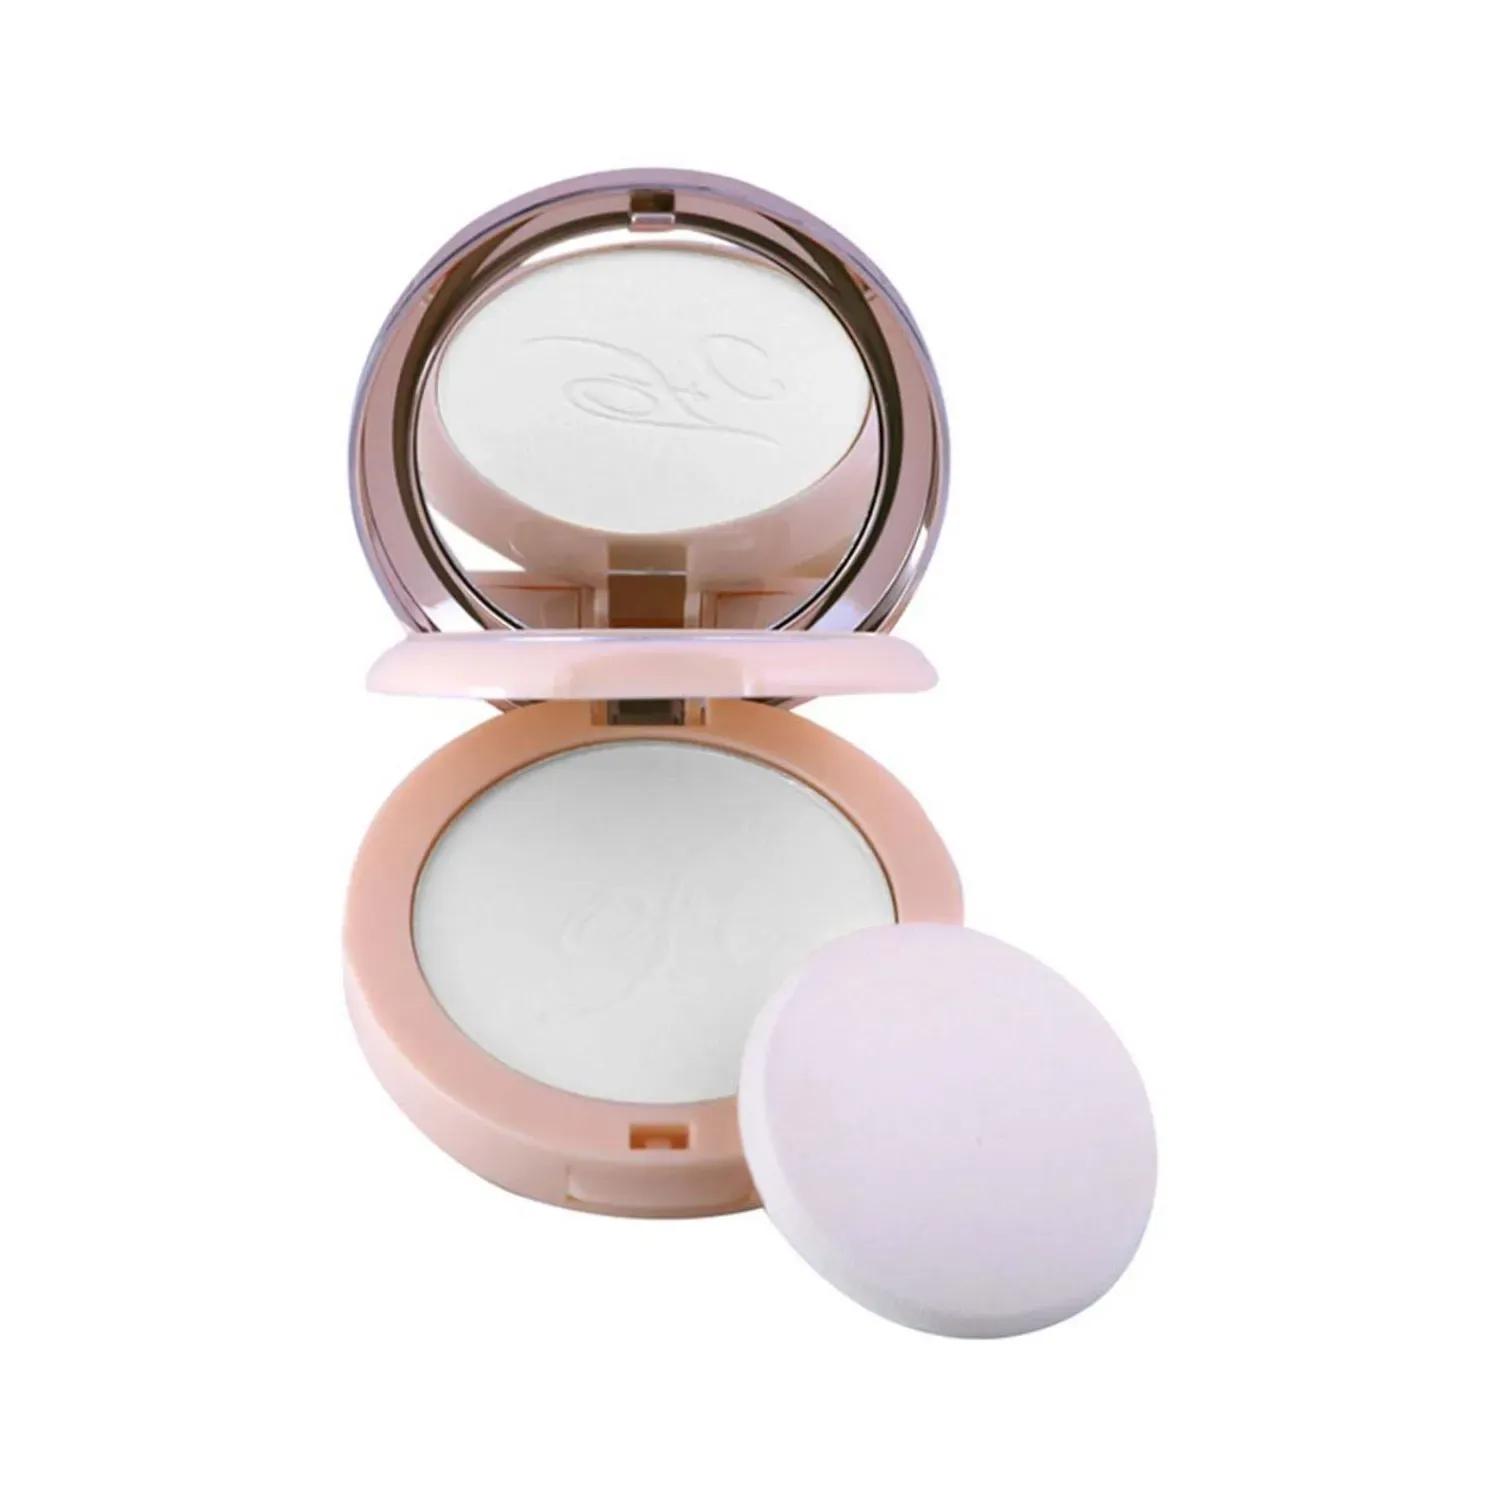 Fashion Colour Nude Makeover 2-In-1 Compact Face Powder - 05 Shade (20g)